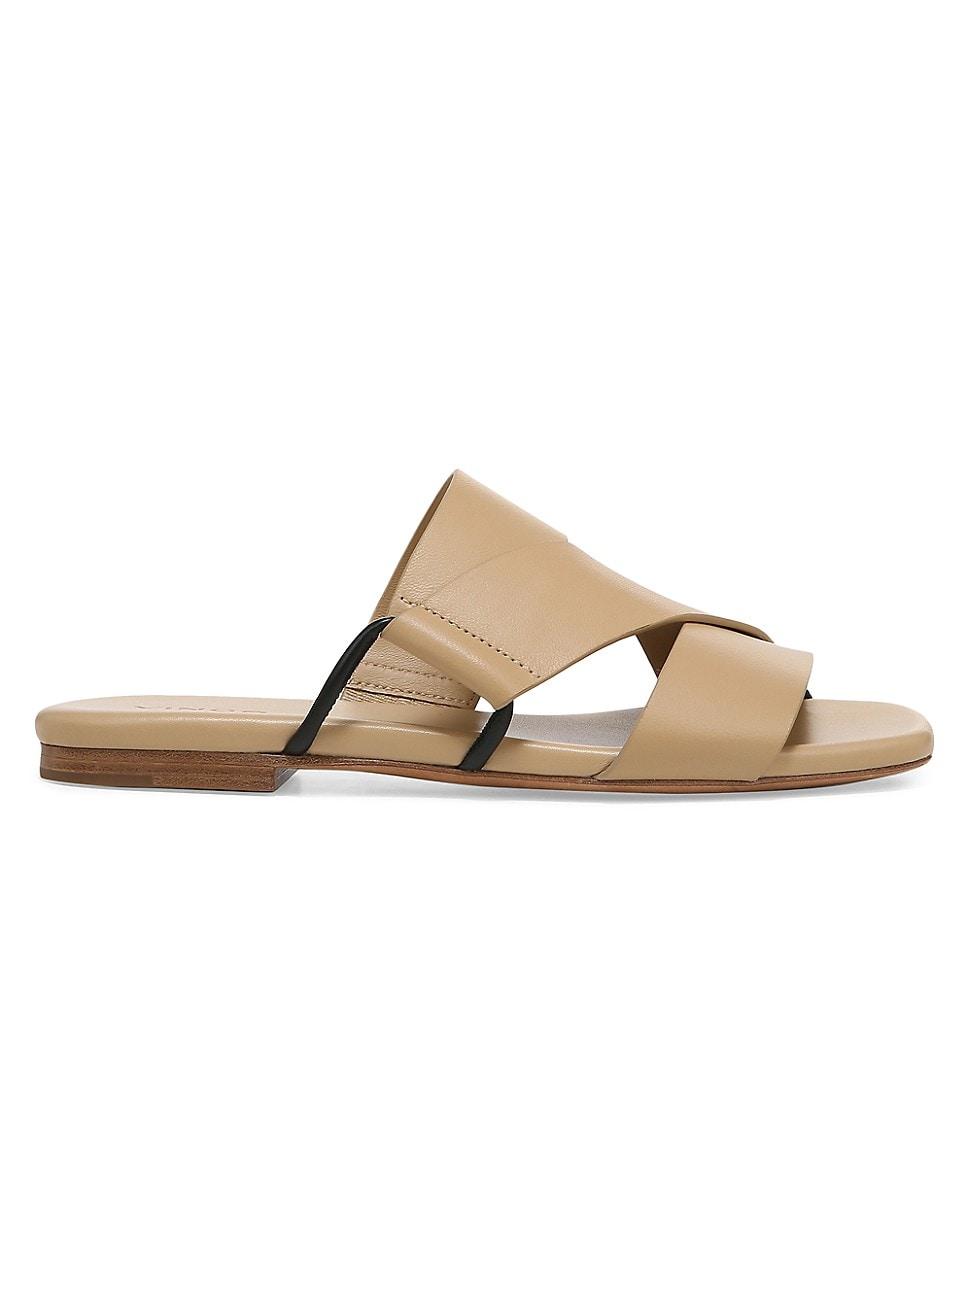 Vince Dylan Leather Sandals in Metallic | Lyst